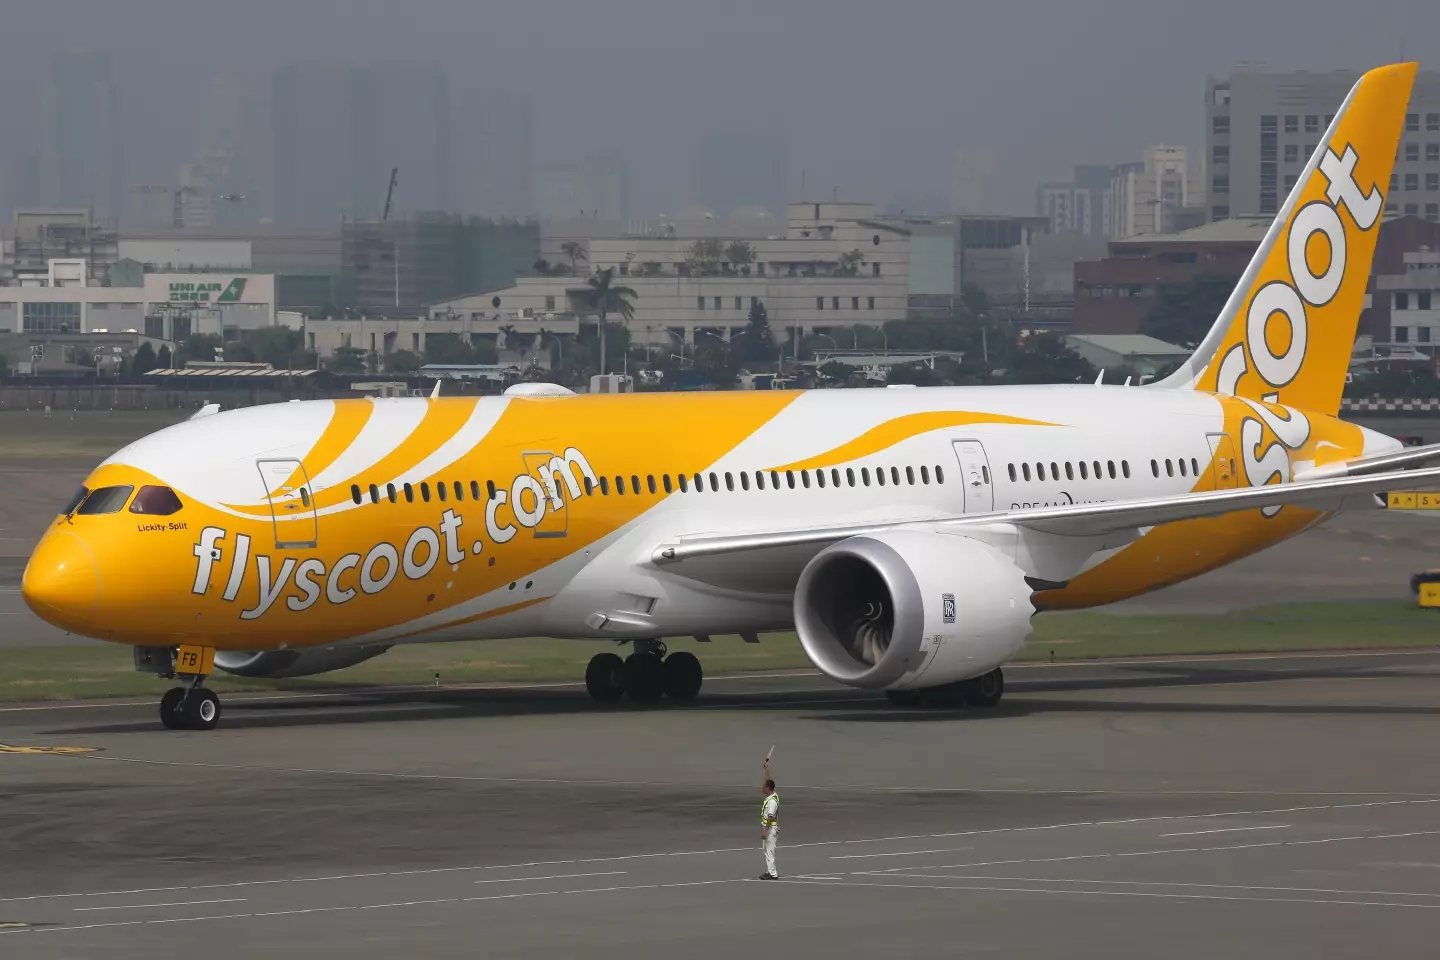 The incident happened on a Scoot plane.